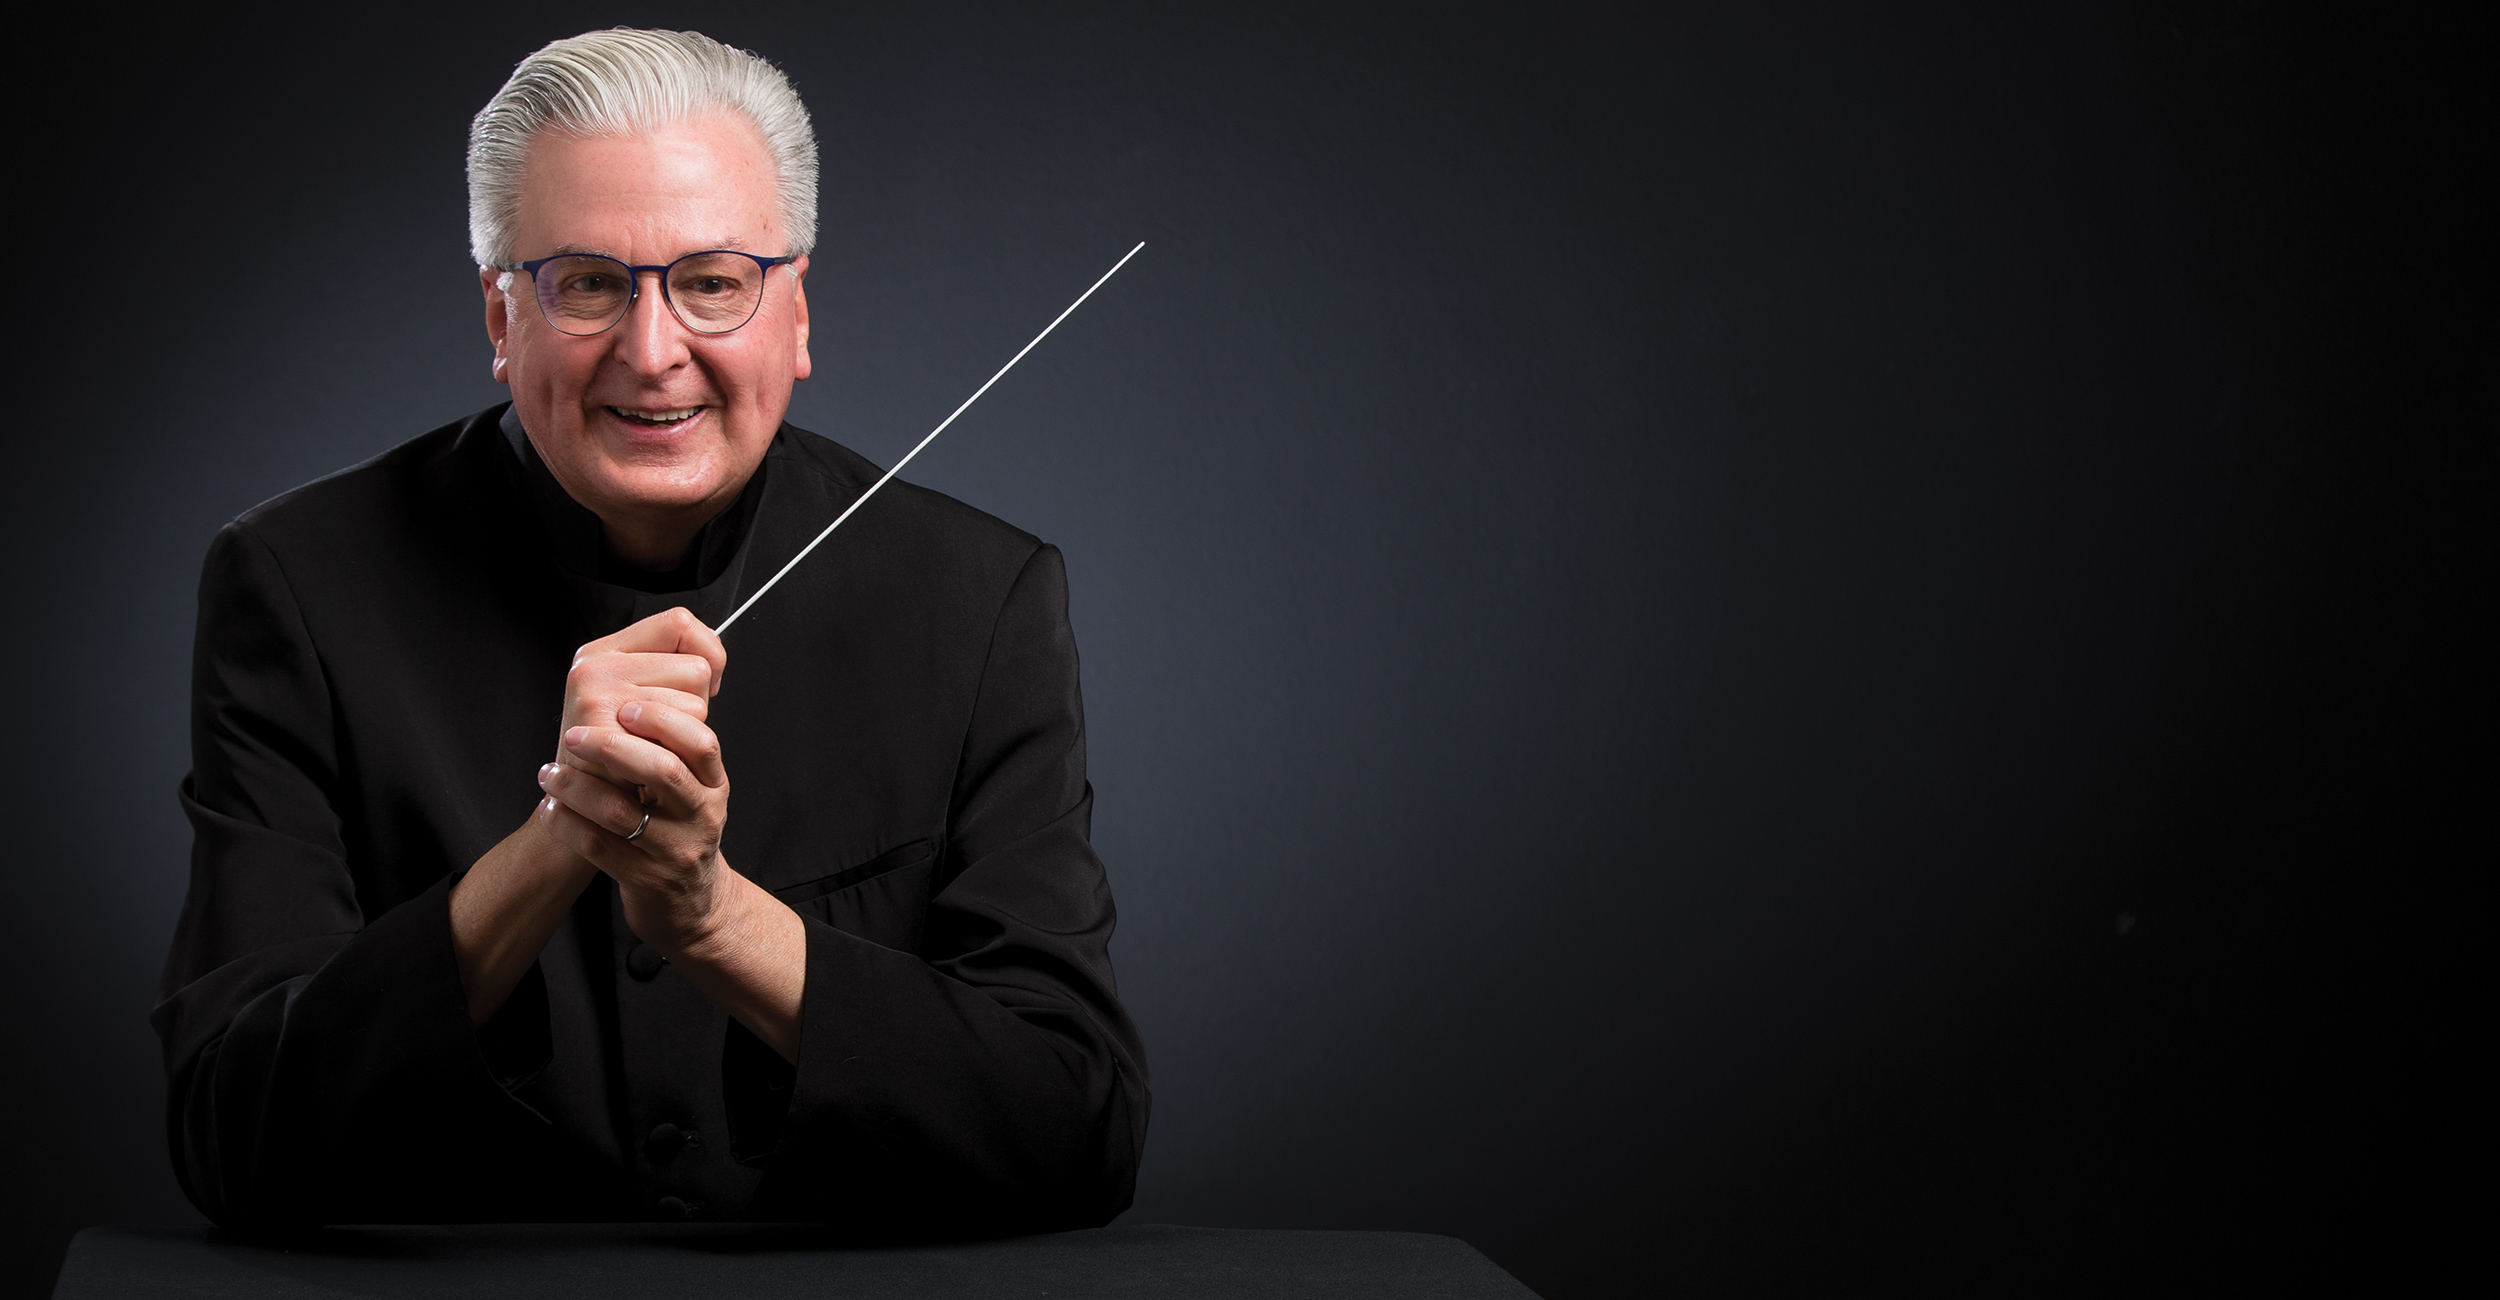 Oklahoma State University's Dr. Joseph Missal is retiring from the director of bands and Regents Professor of Conducting after 35 years in May.